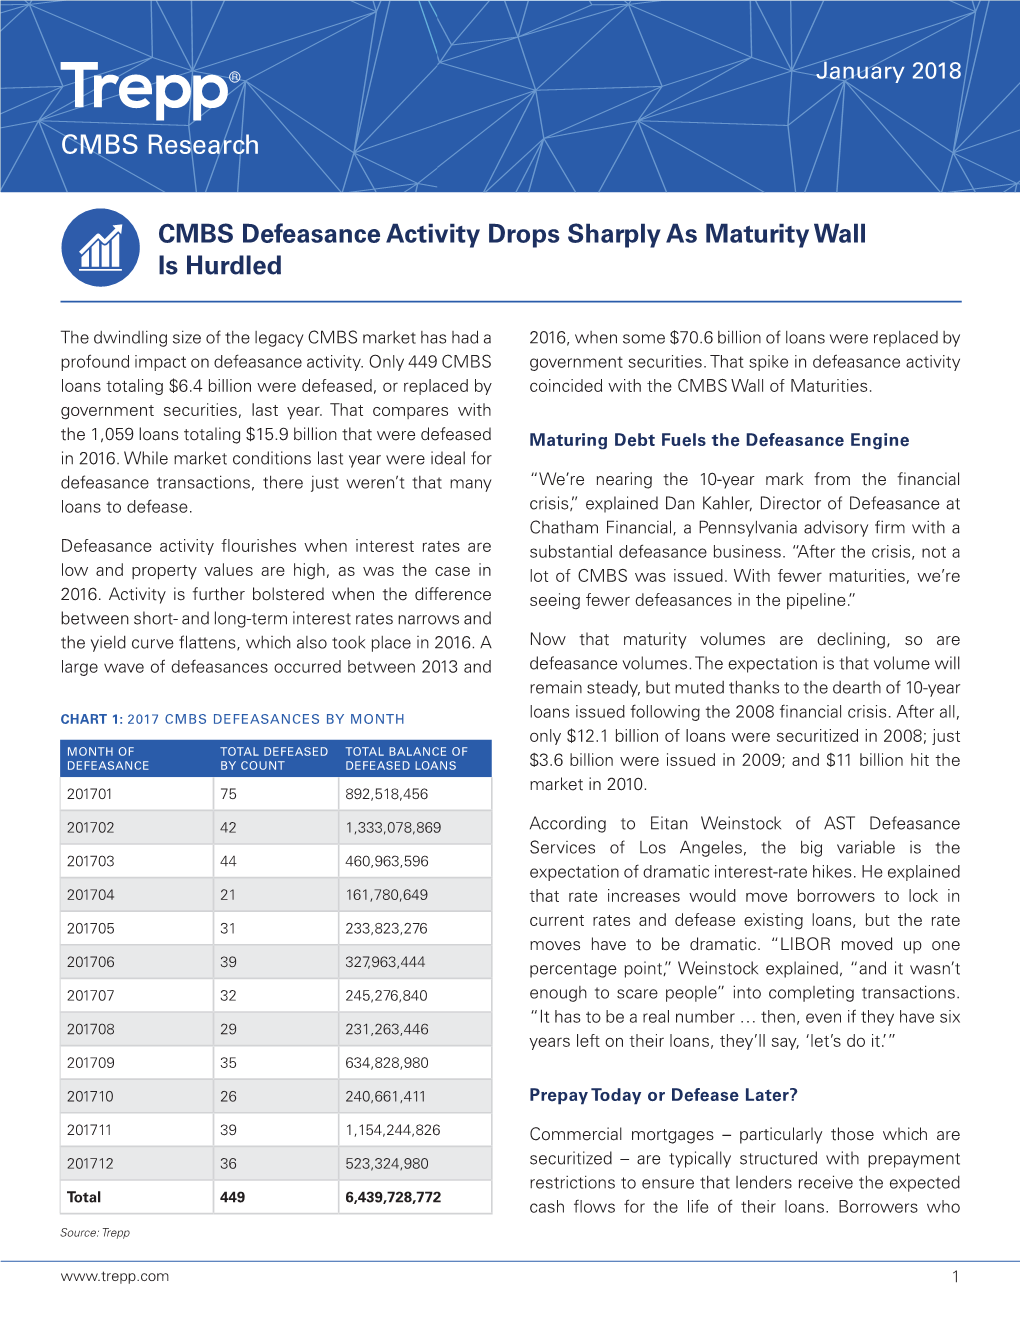 CMBS Research